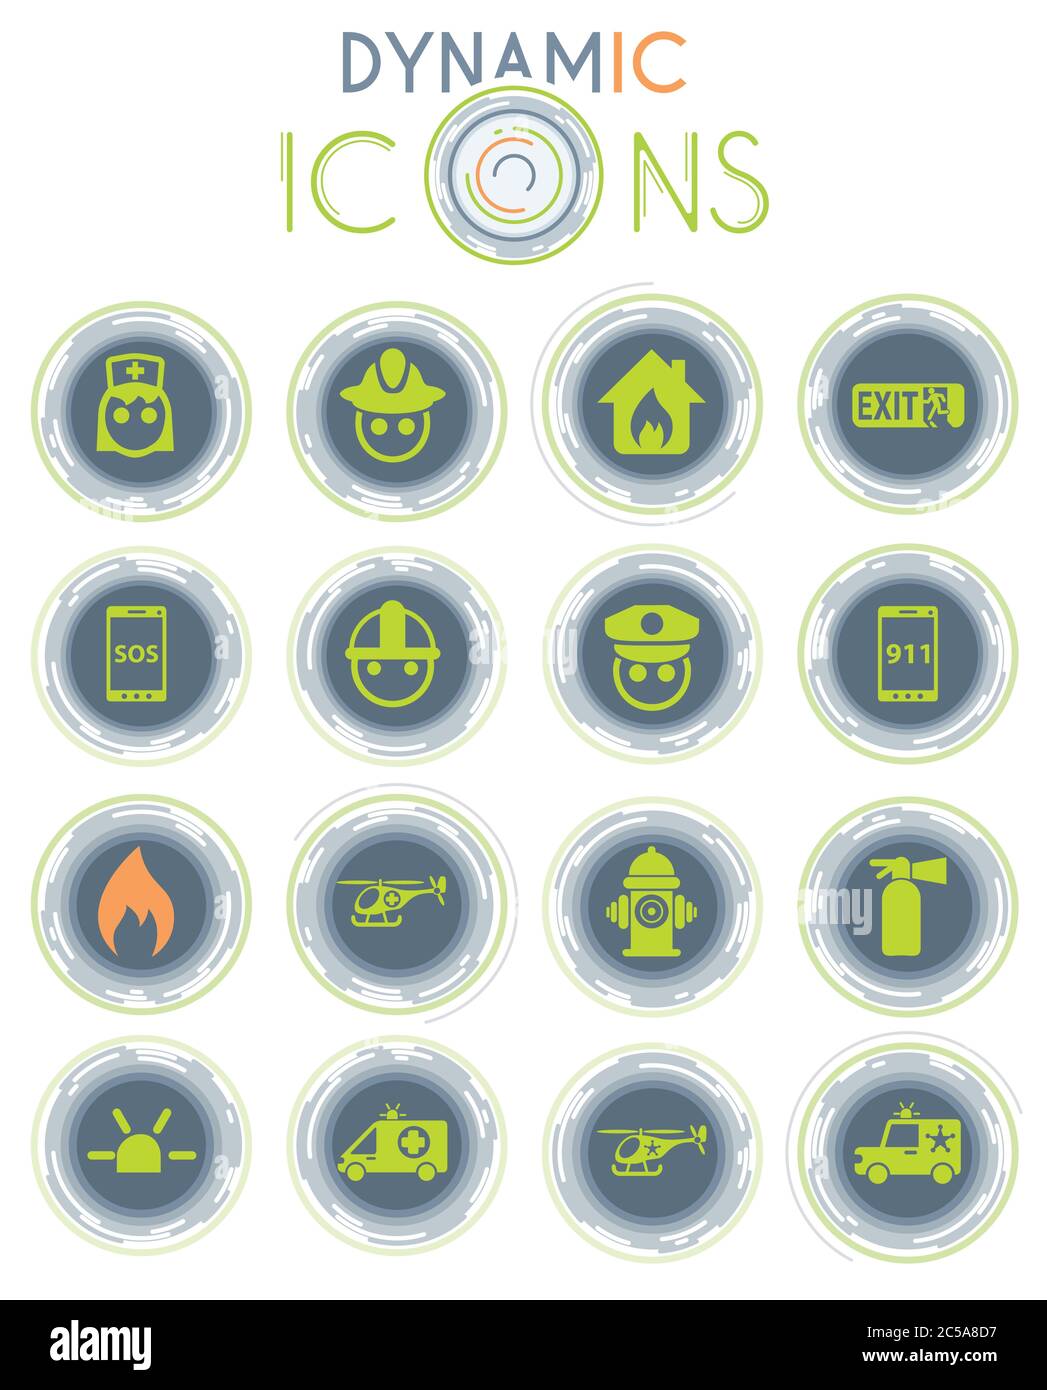 emergency dynamic icons Stock Vector